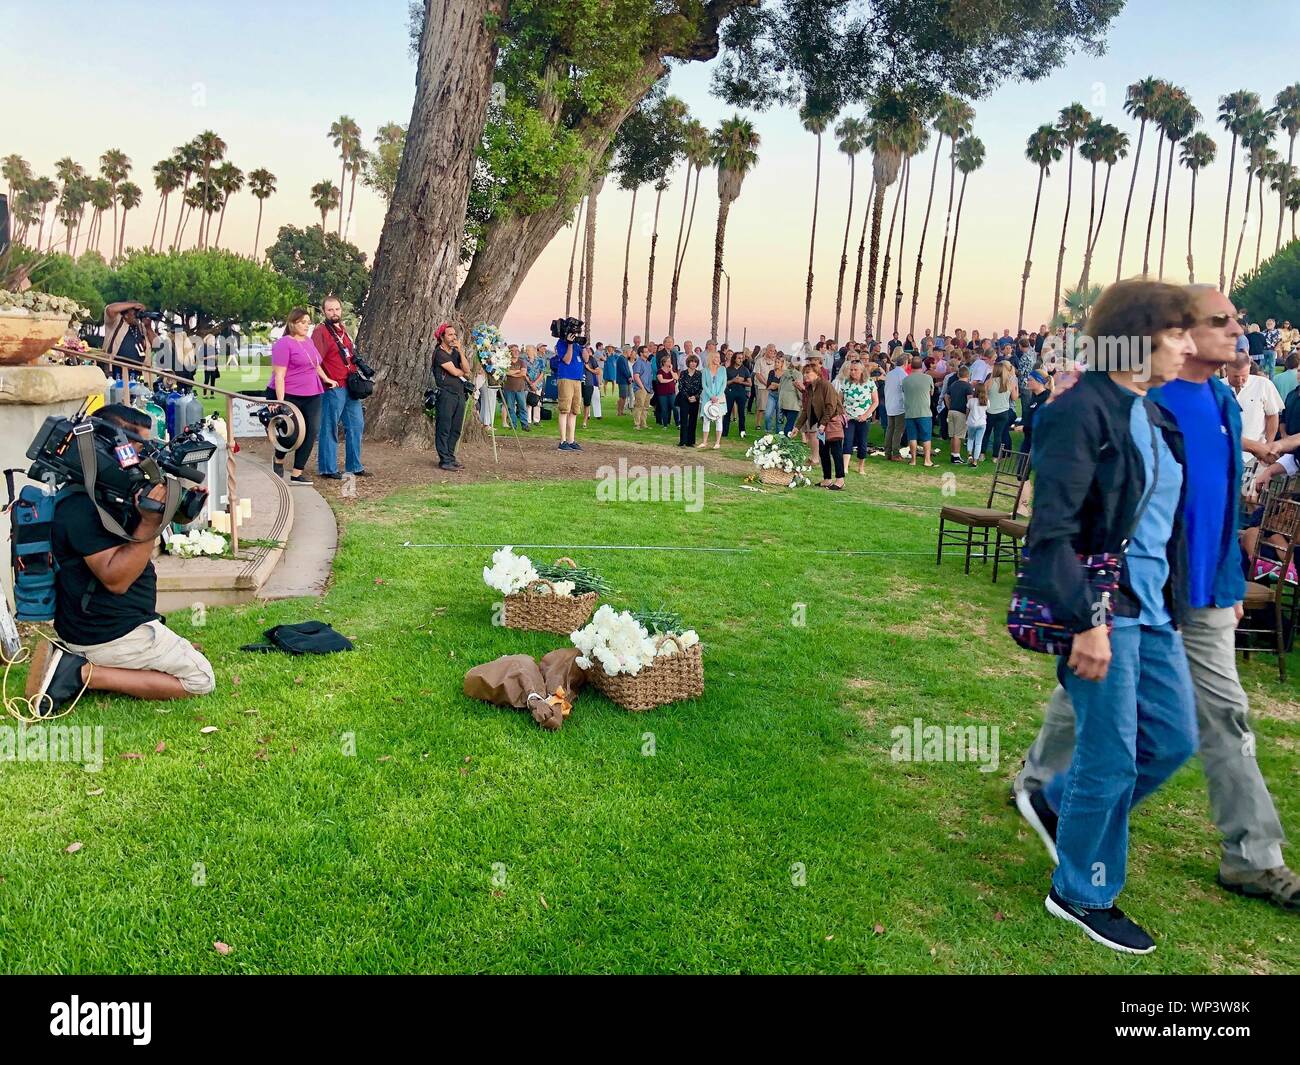 Santa Barbara, California, USA. 6th Sep, 2019. Family, friends and members of Santa Barbara community mourn together at Vigil on September 6 at Chase Palm Park in Santa Barbara for the 34 victims of the dive boat Conception fire. Credit: Amy Katz/ZUMA Wire/Alamy Live News Stock Photo